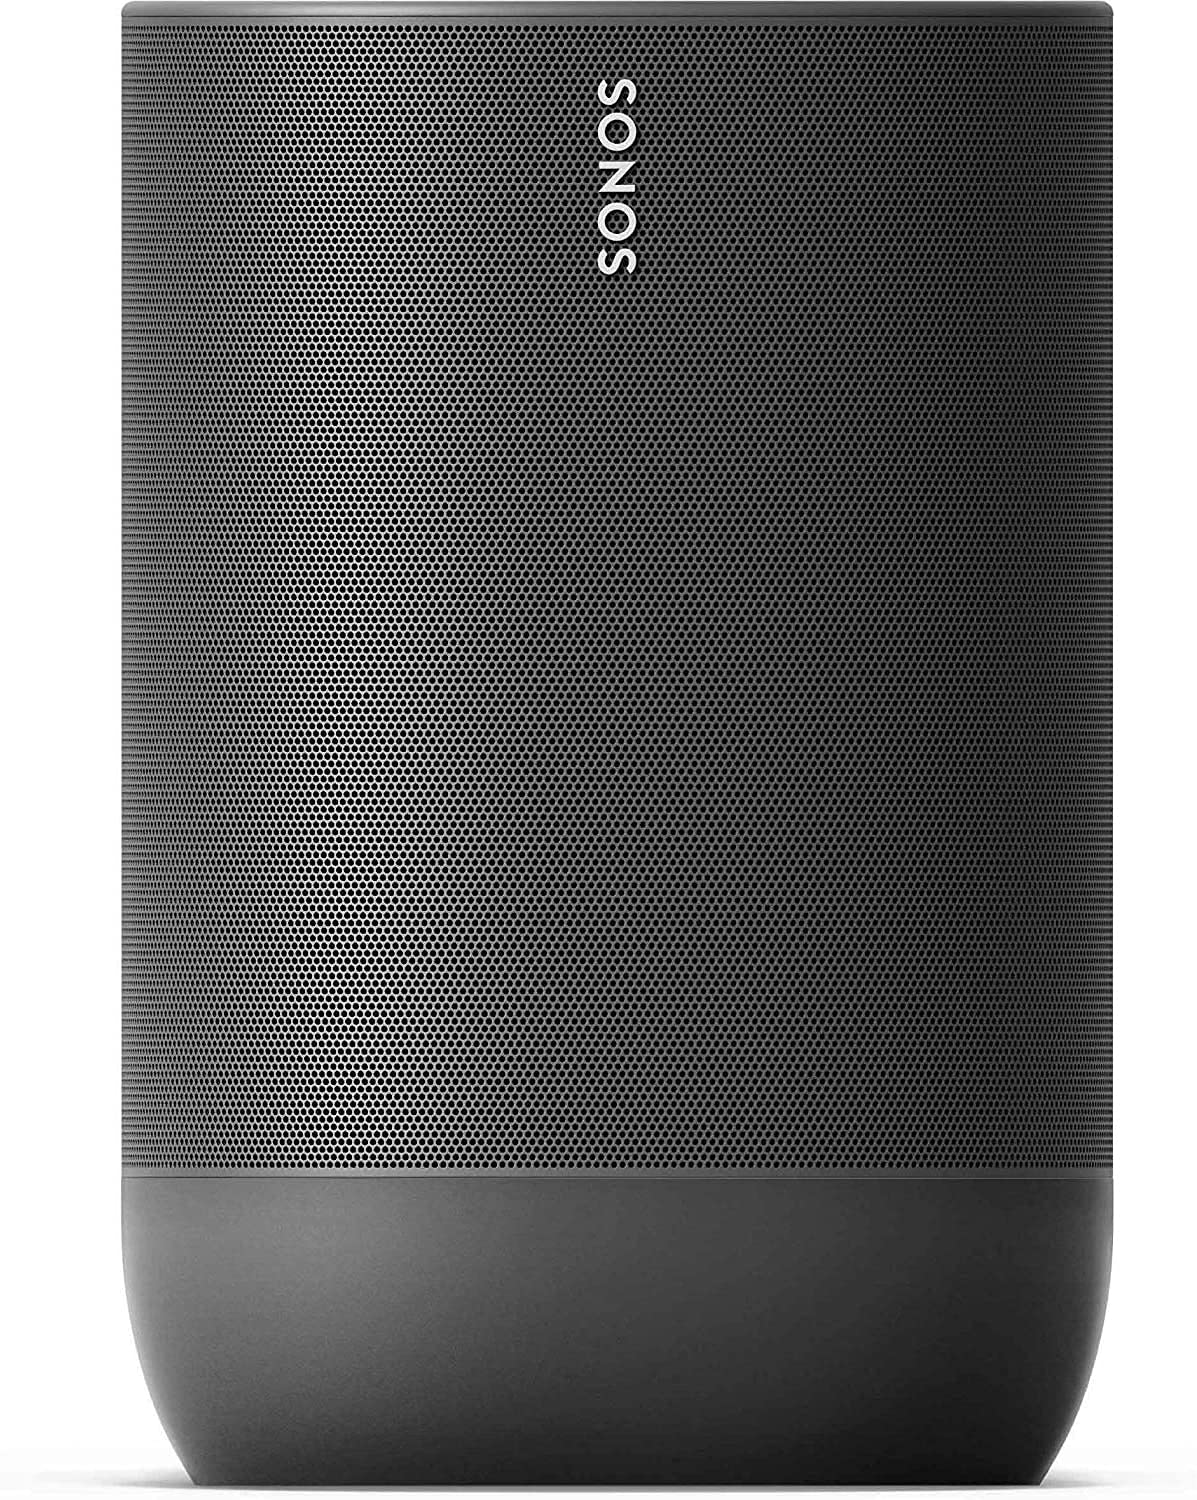 Four Room Sonos Move - Battery-Powered Smart Wi-Fi and Bluetooth Speaker with Alexa Built-in